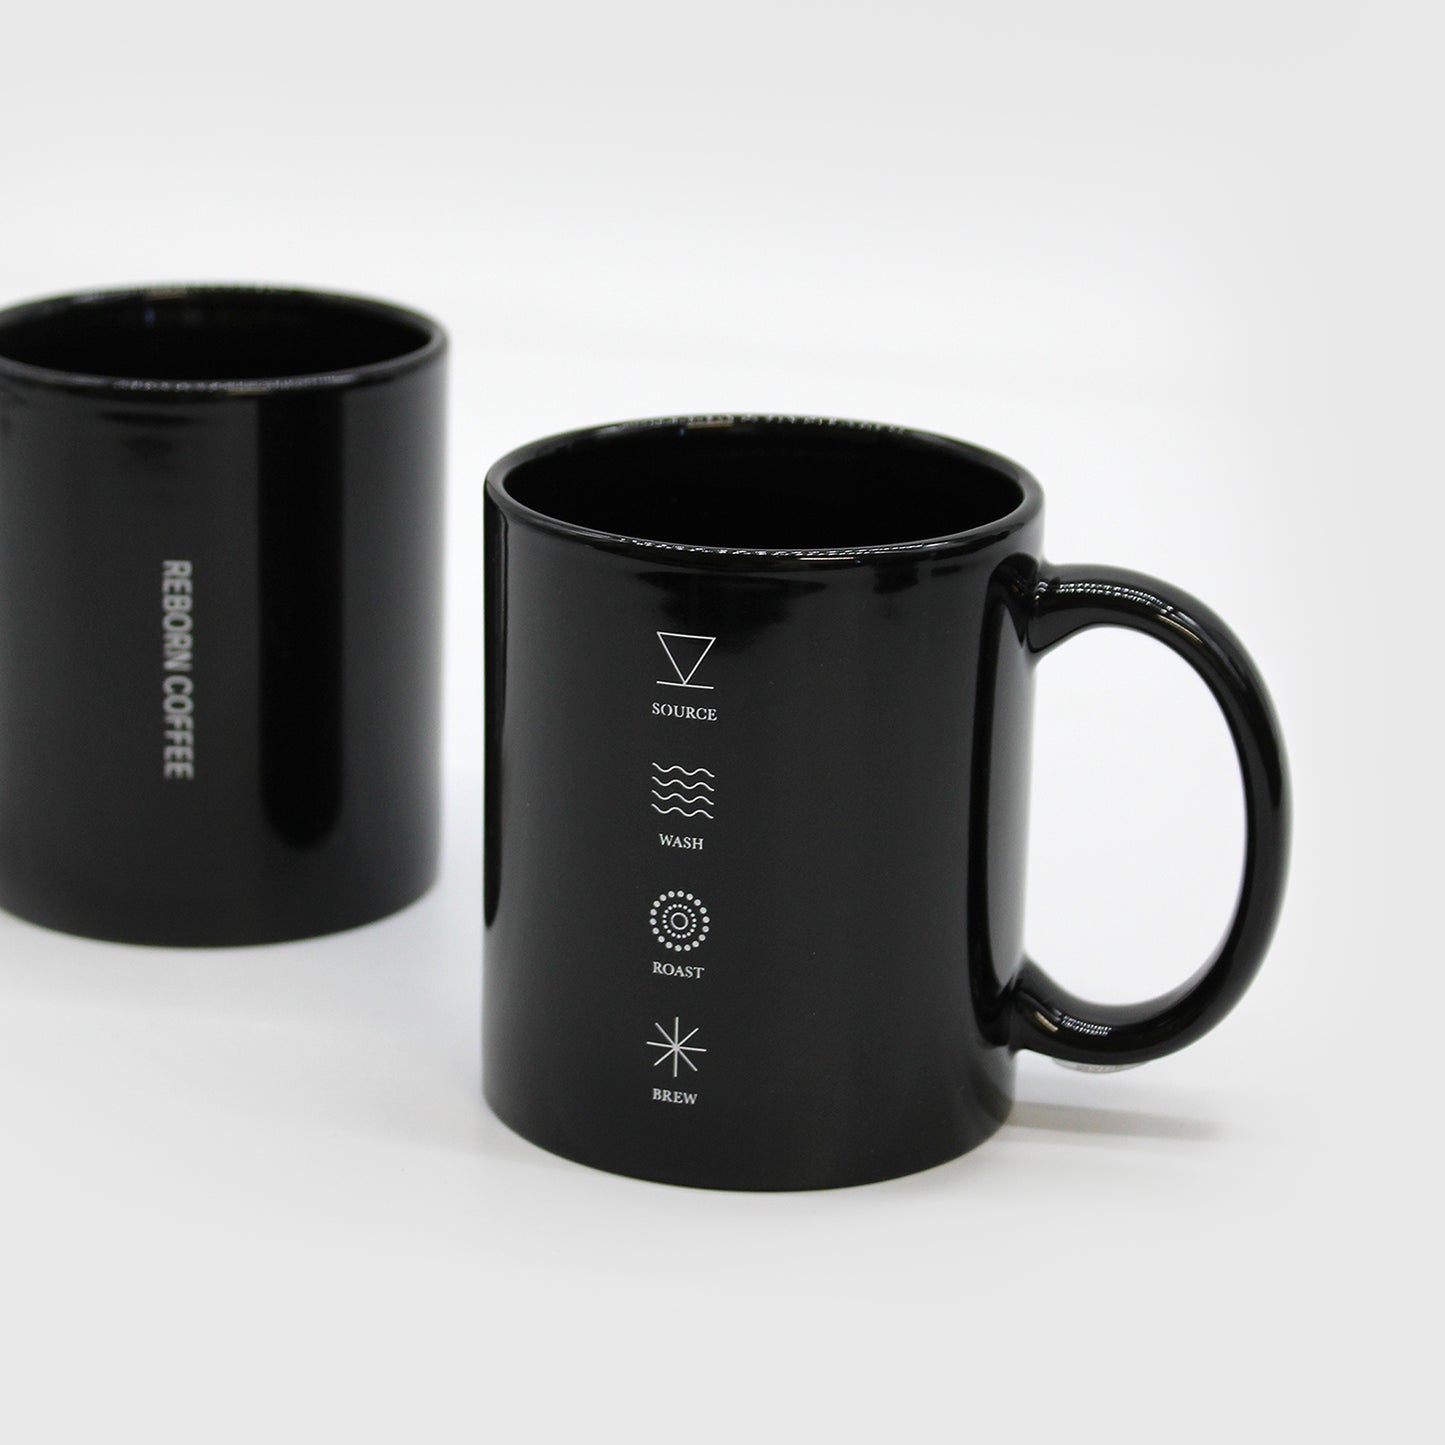 Black Ceramic mug with C handle, has 4 symbols aligned vertically, with text under each symbol that reads, “Source, Wash, Roast, Brew.” Second mug to the left has text, “Reborn Coffee,” on it. 2 of 3.